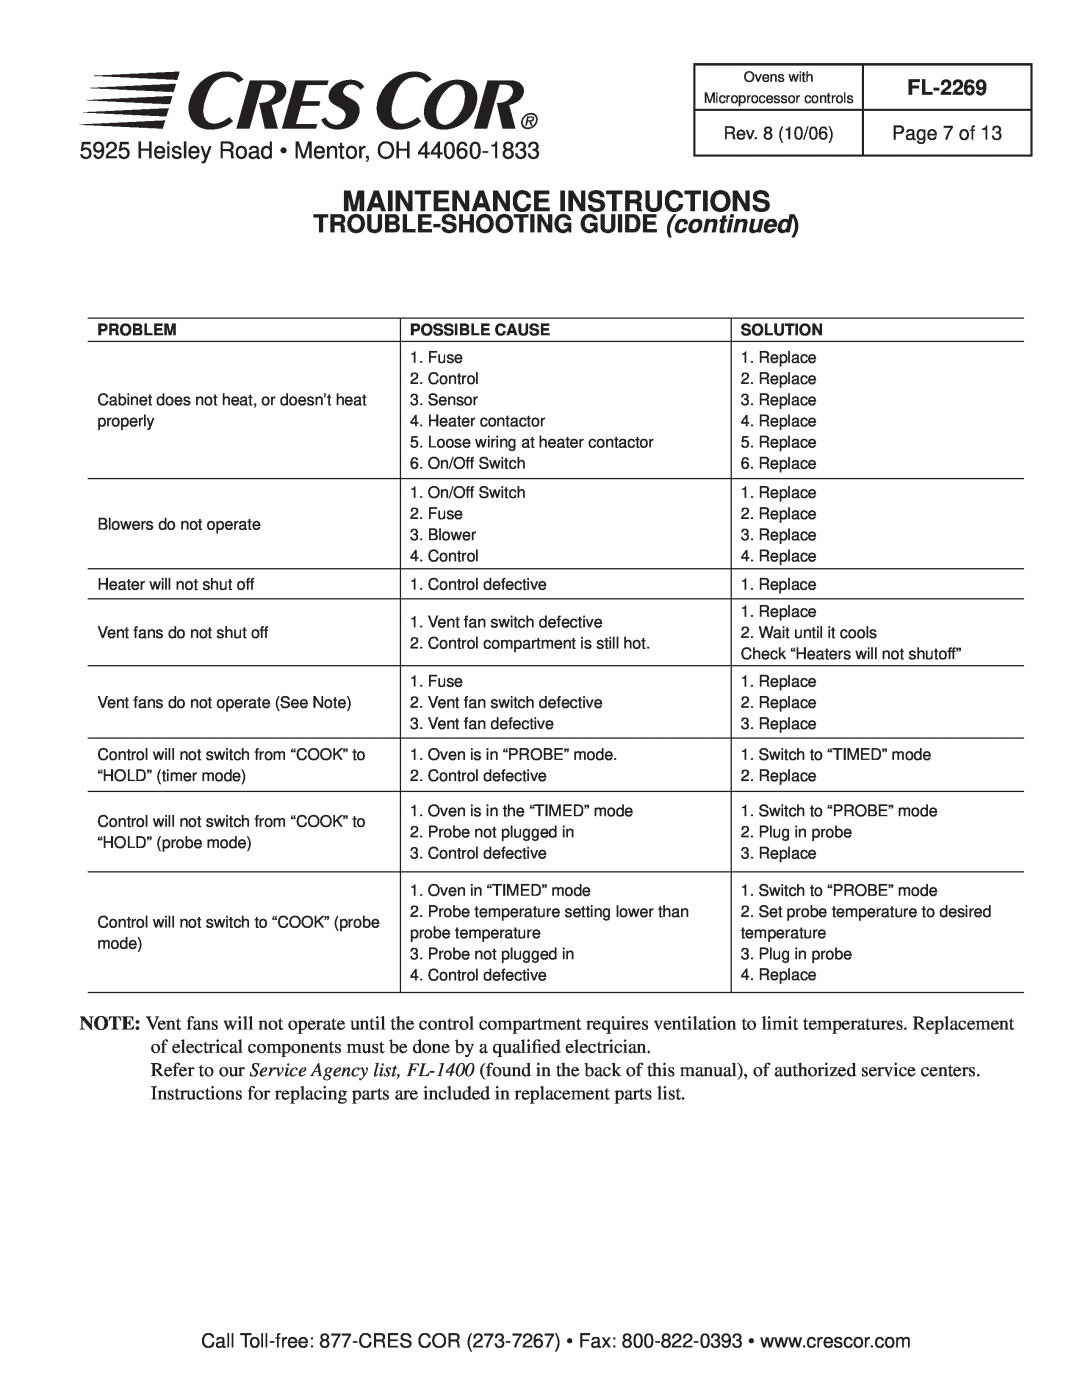 Cres Cor CO151H189B-Q1 manual TROUBLE-SHOOTINGGUIDE continued, Page 7 of, Maintenance Instructions, Heisley Road Mentor, OH 